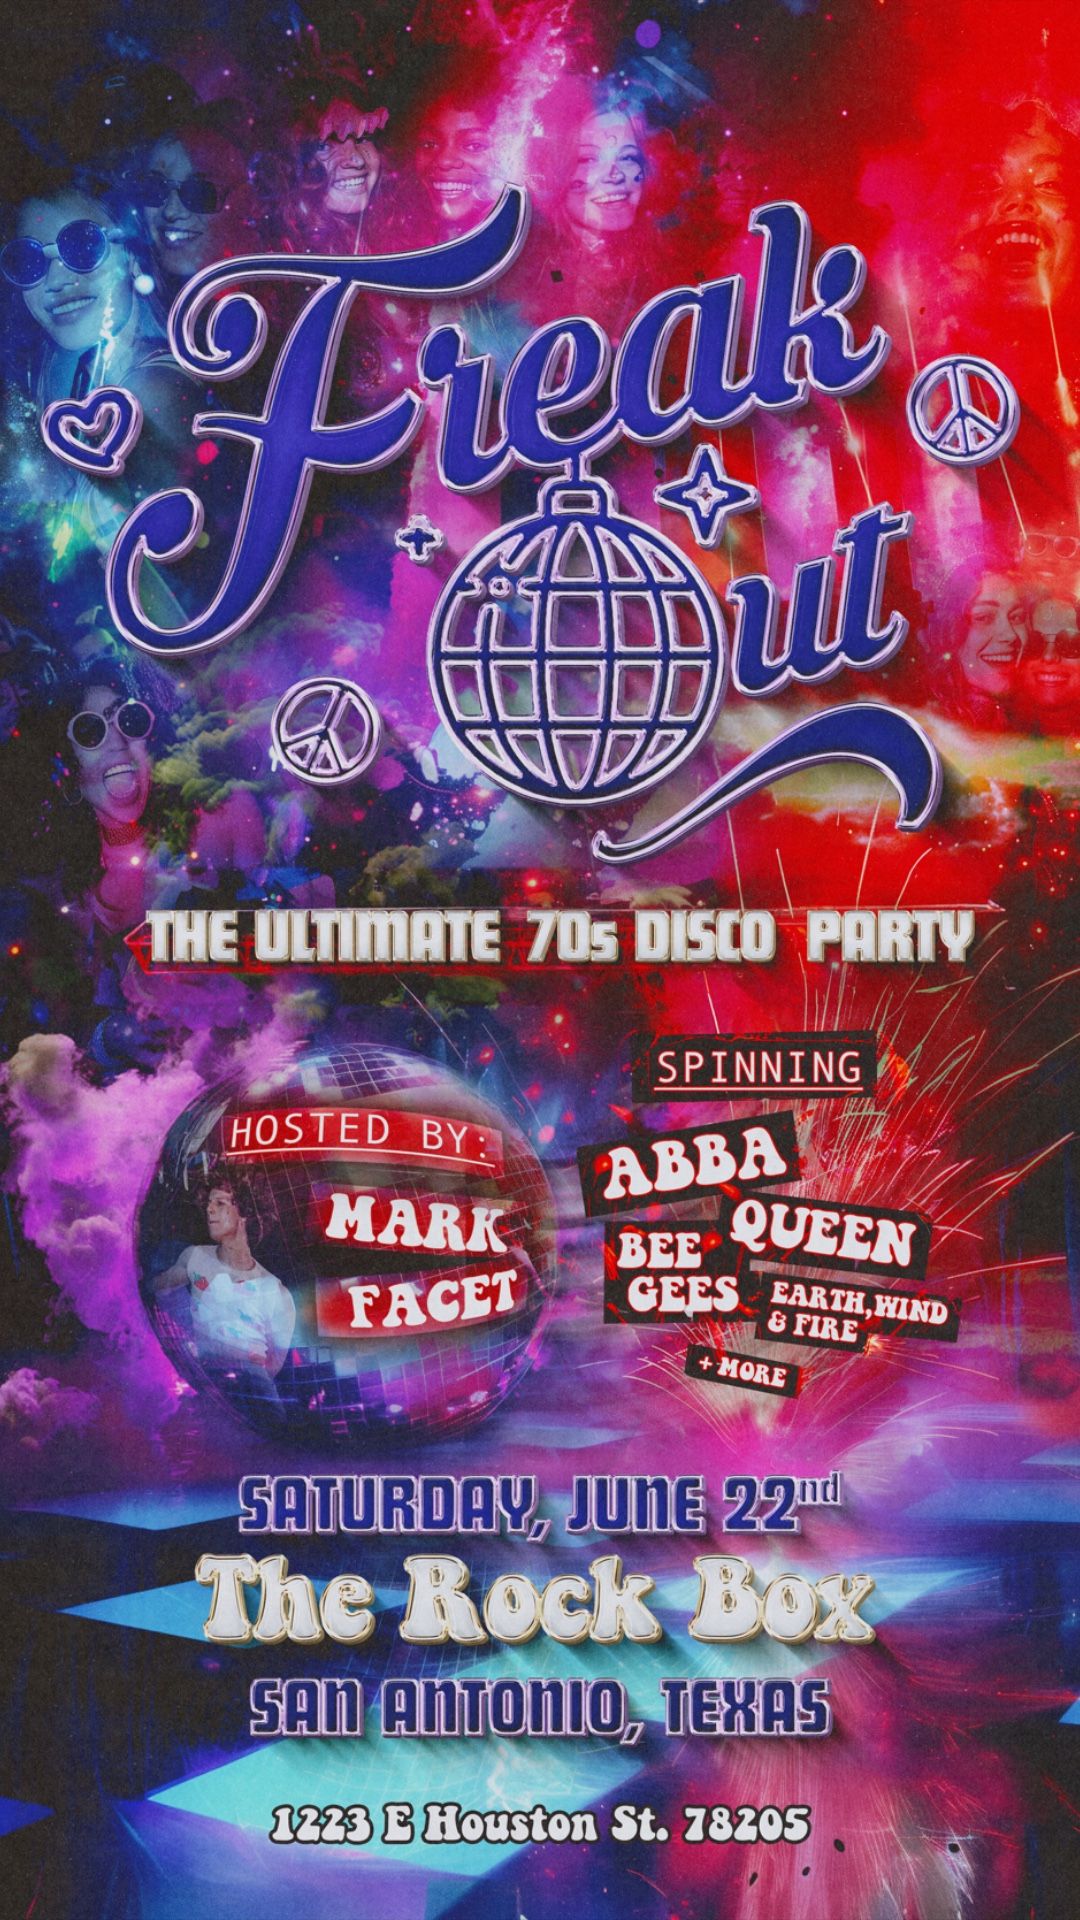 Freak Out!: The Ultimate Disco Party!